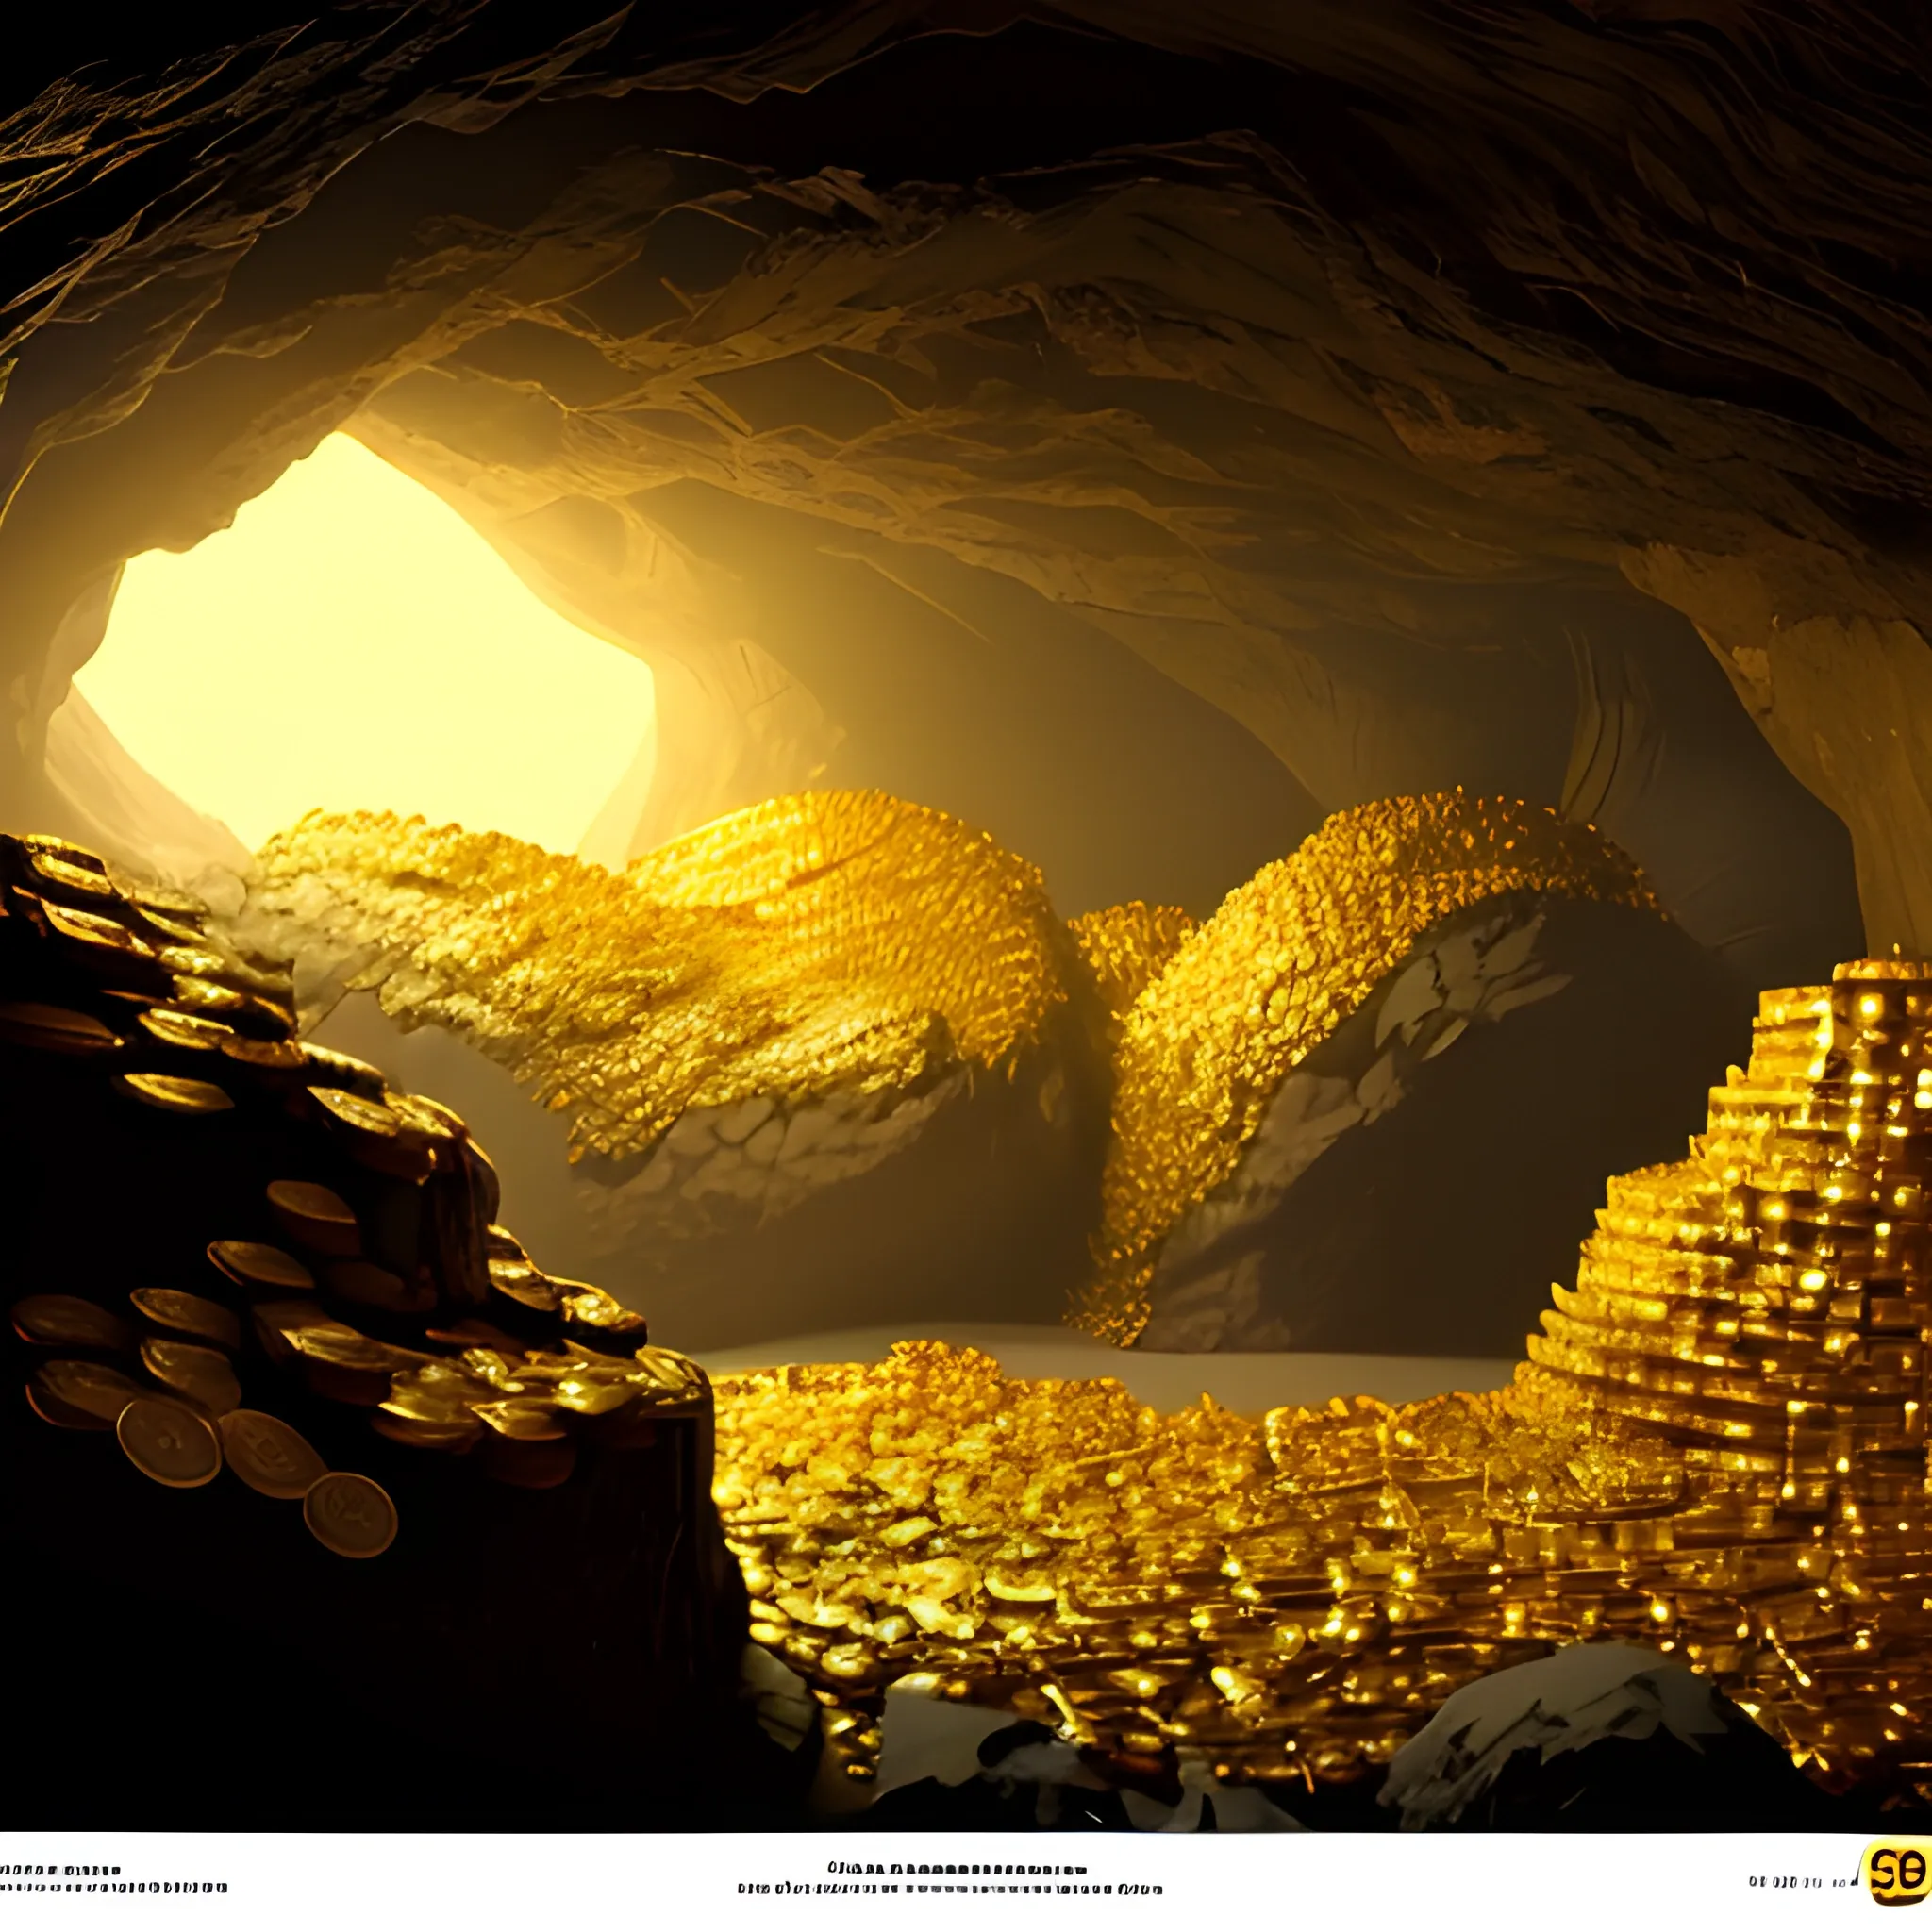 an enormous pile of millions of gold coins in a dark cavern cine... - Arthub.ai